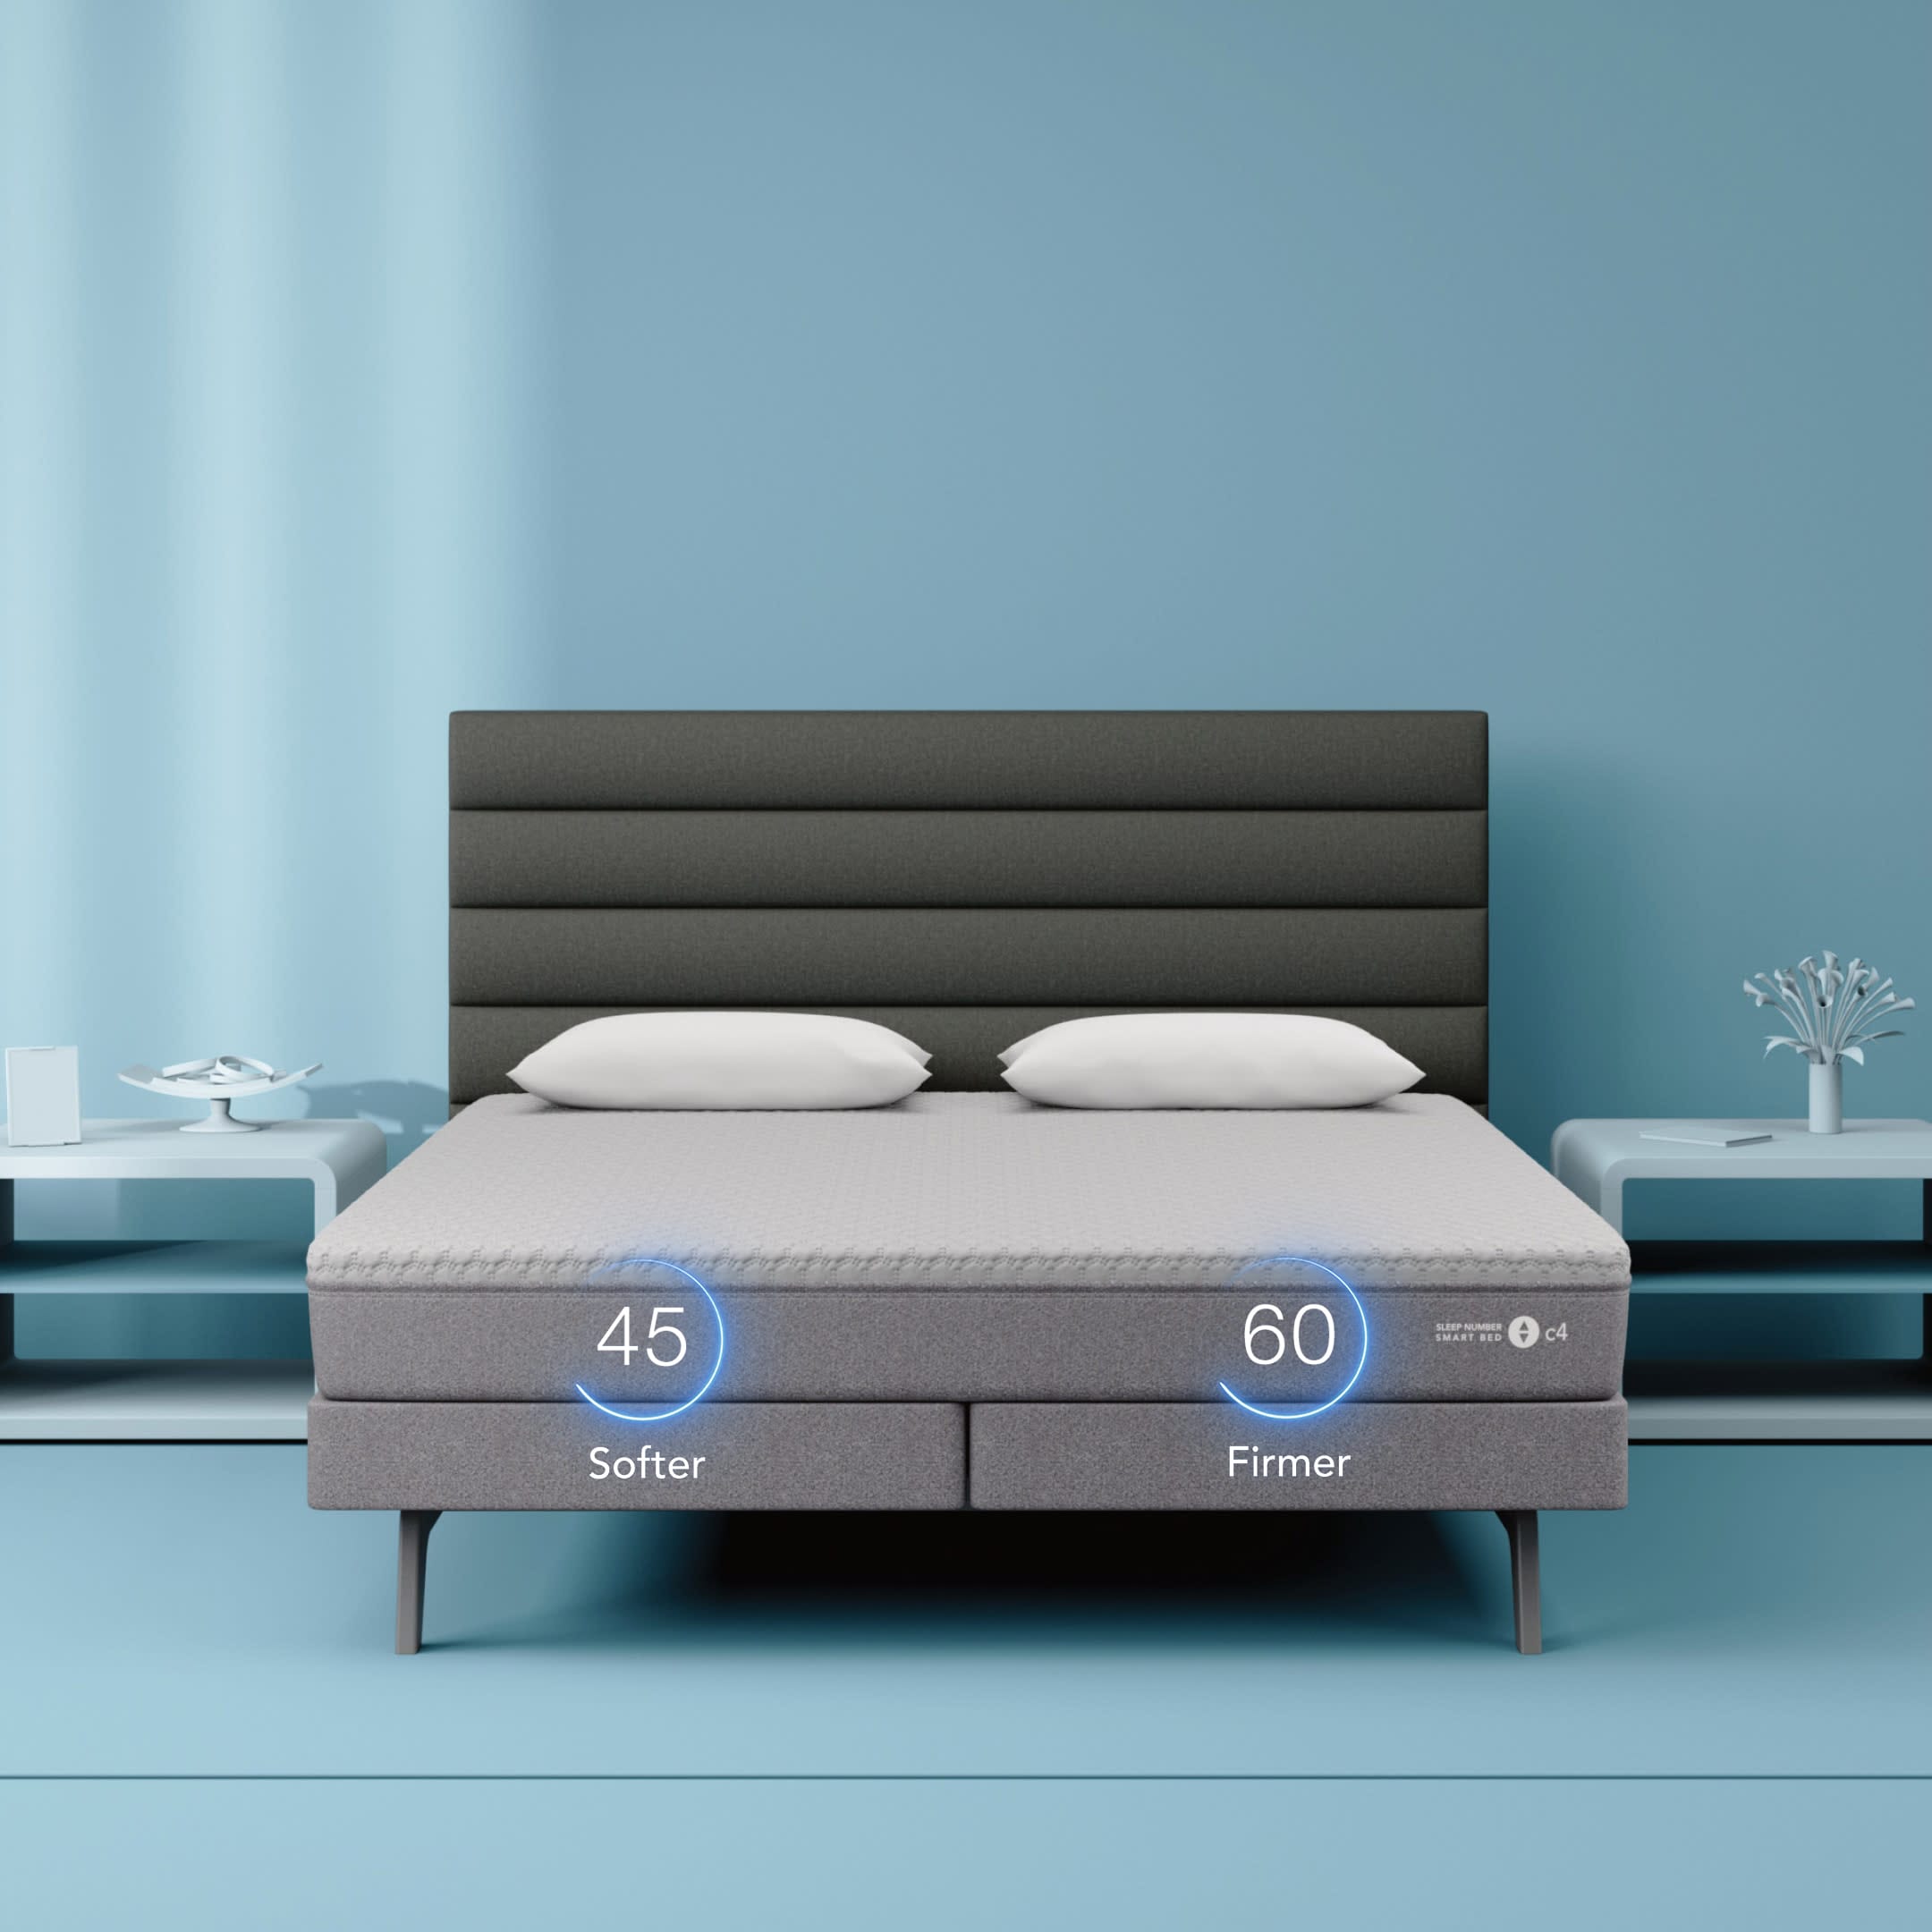 https://cdn.sleepnumber.com/image/upload/f_auto,q_auto:eco/v1695048843/workarea/catalog/product_images/c4/c4_1080_Gallery_Front_Numbers